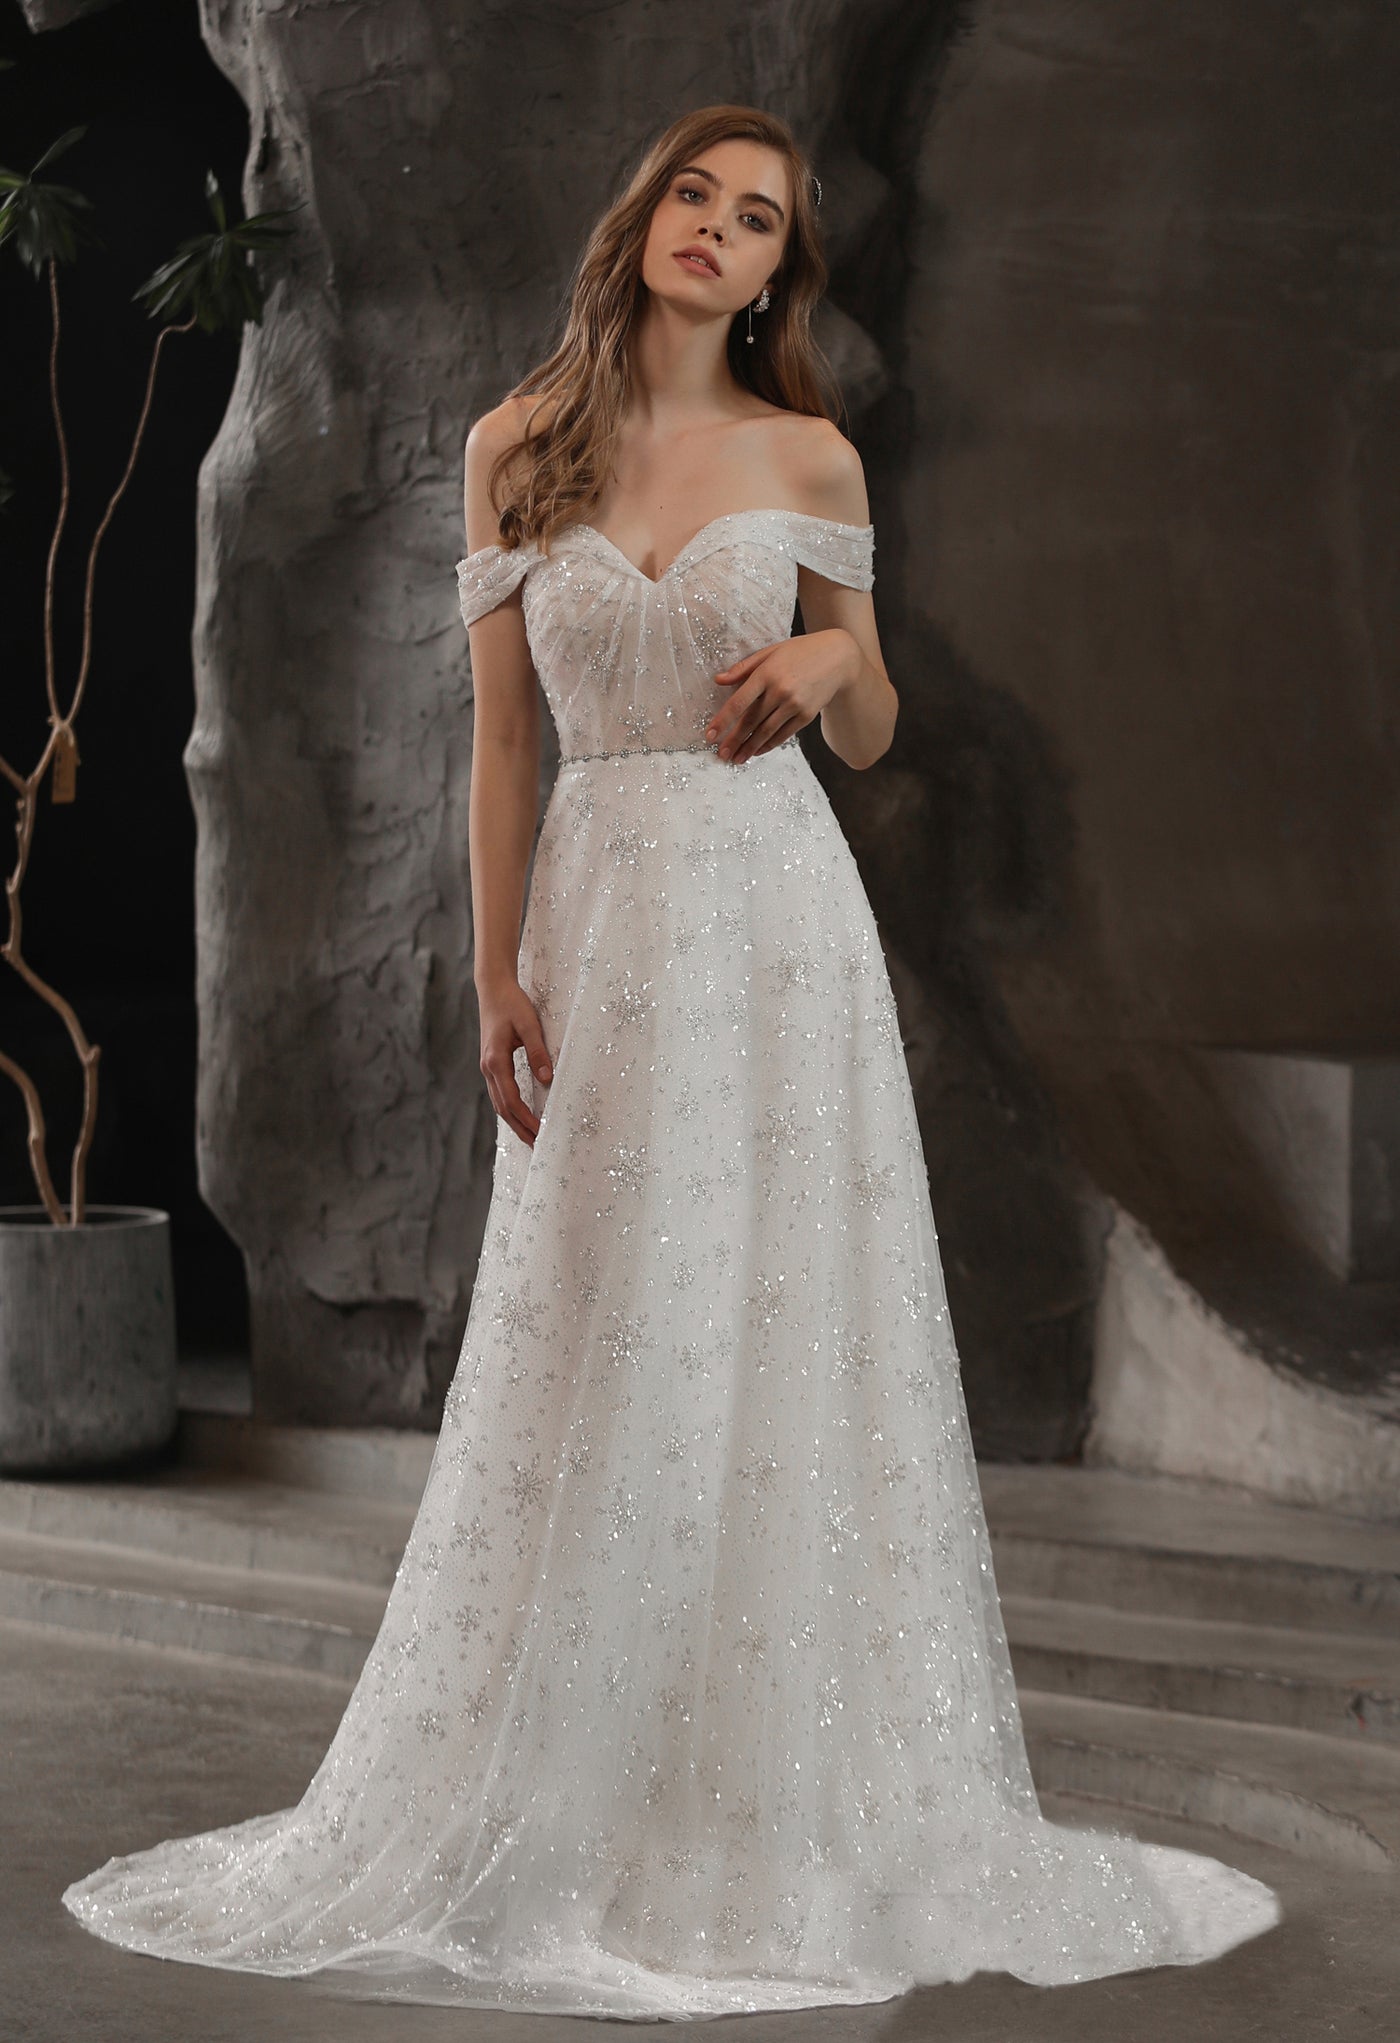 A woman in a white wedding dress from Bergamot Bridal, the Sparkly Beaded A-Line Bridal Gown With Off the Shoulder Sweetheart Neckline, is standing in front of a stone wall.